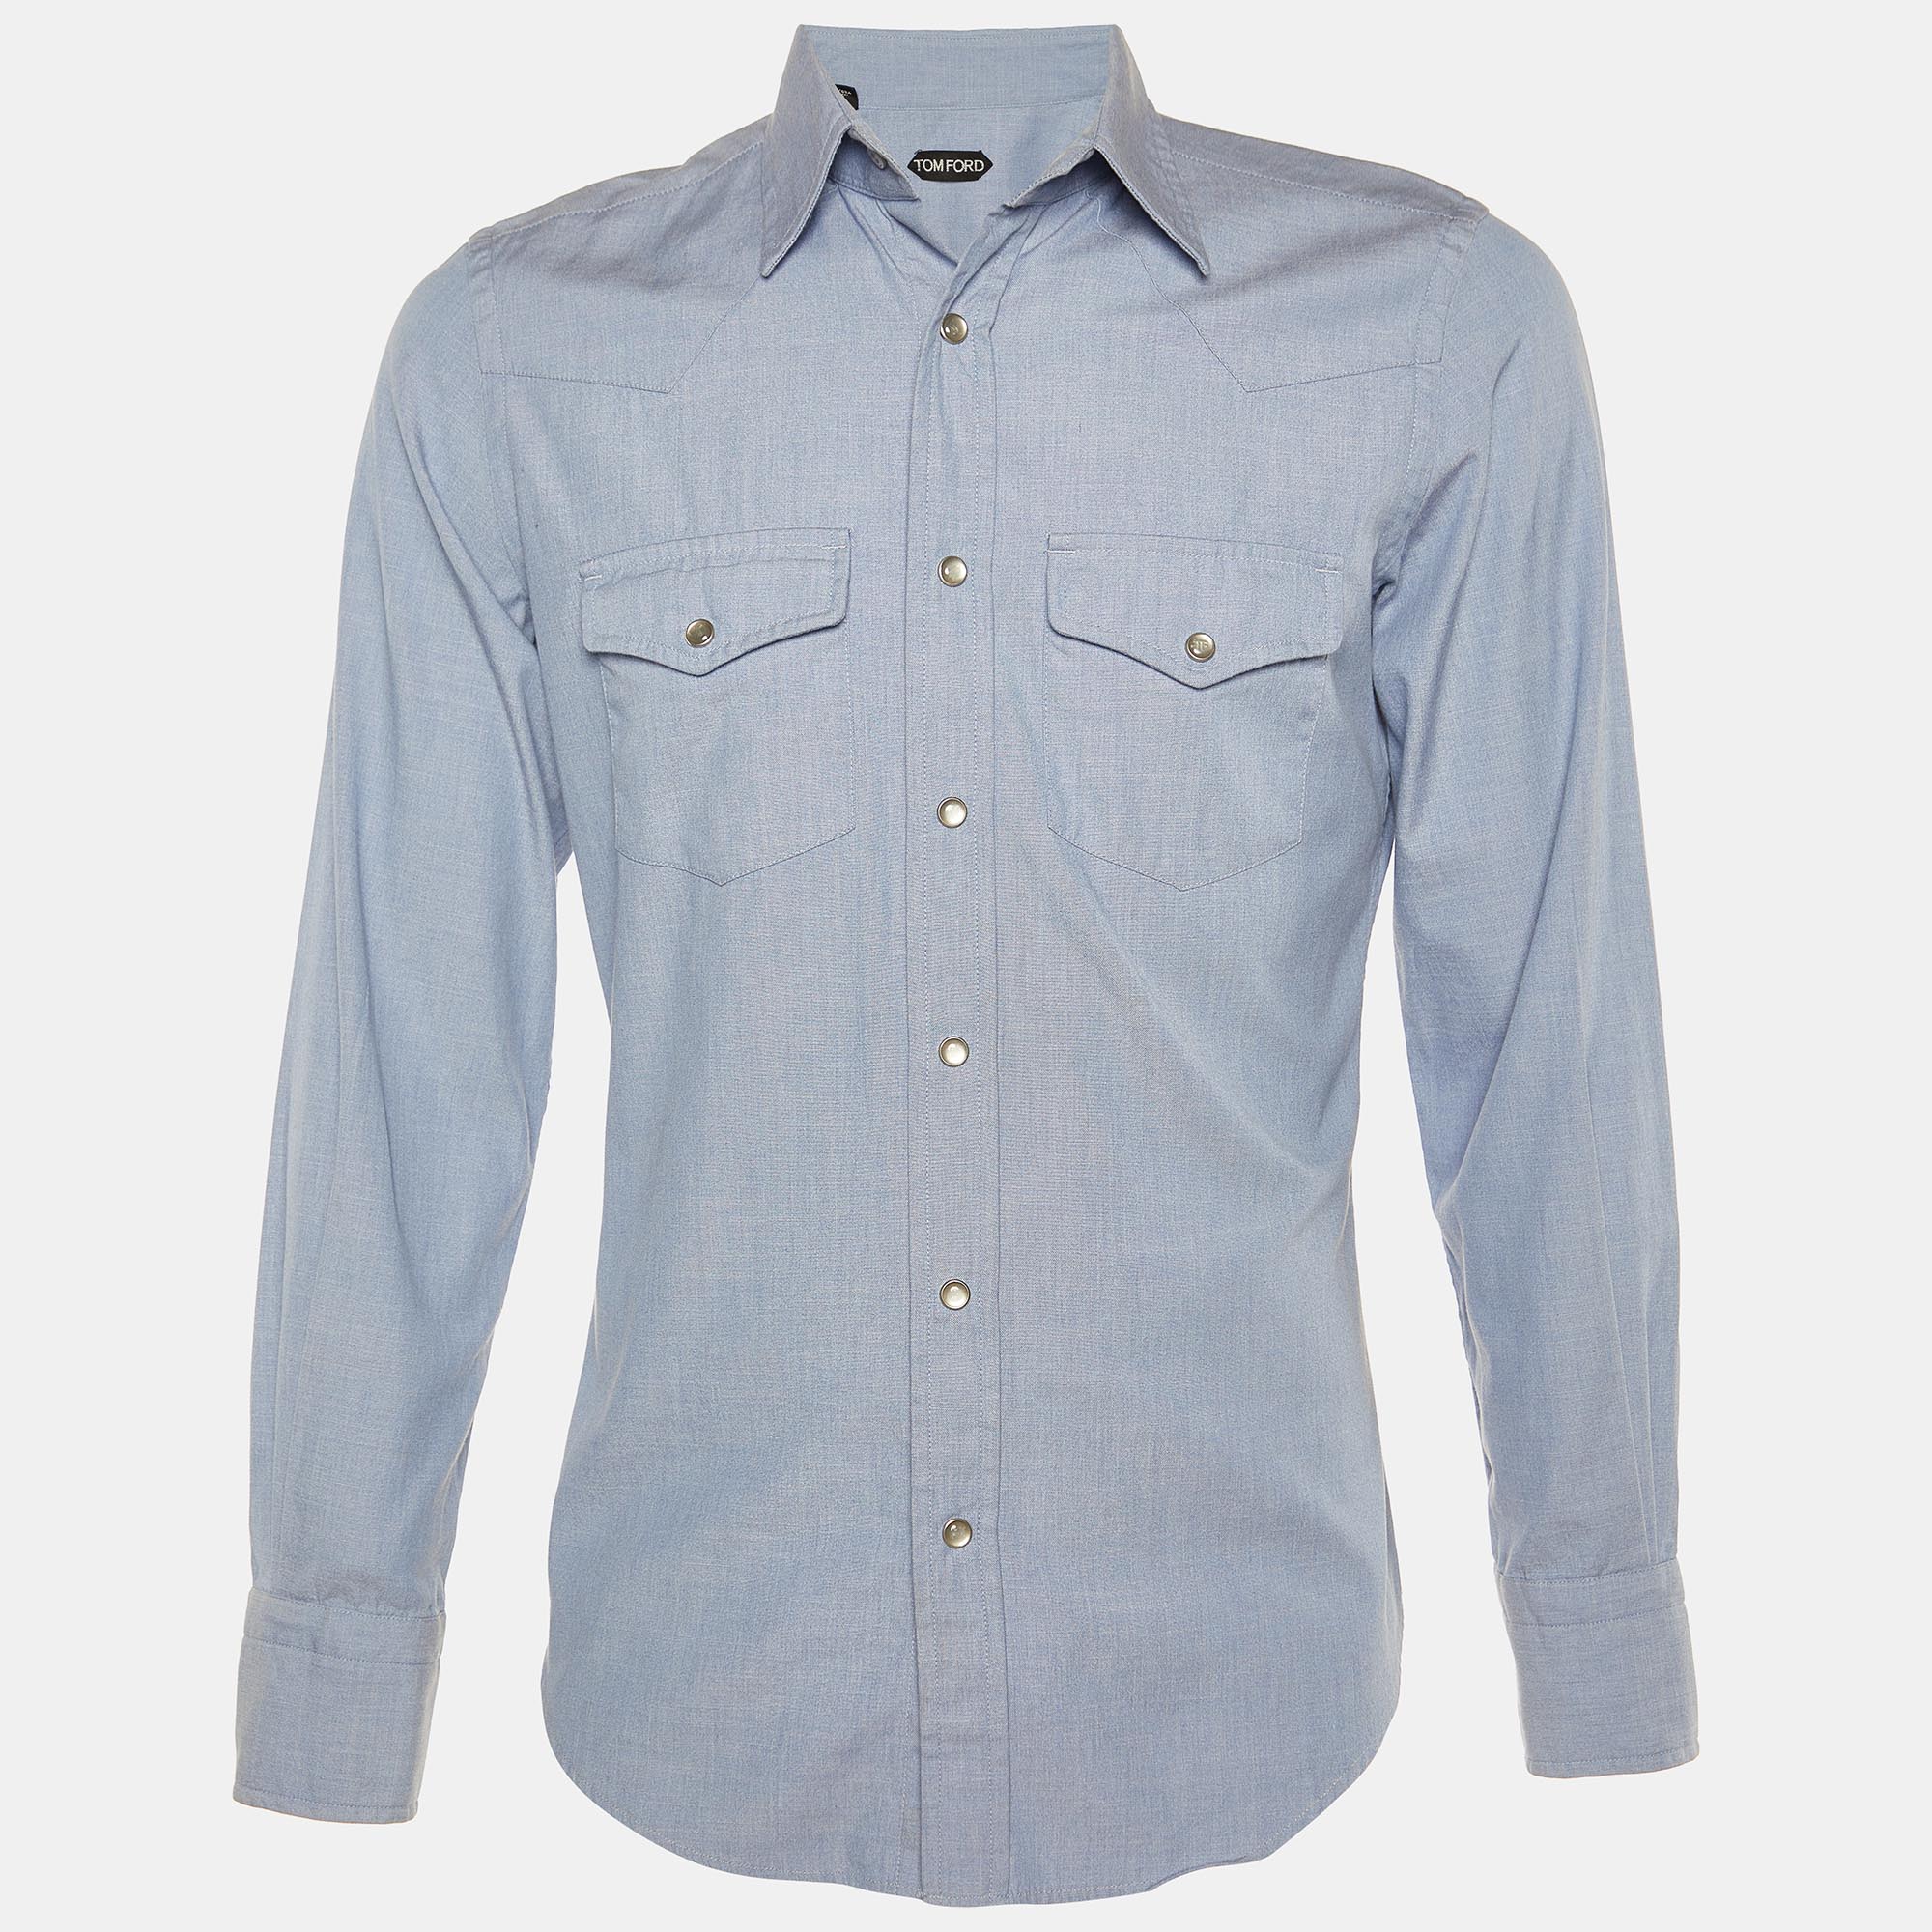 Tom ford blue cotton button front shirt m